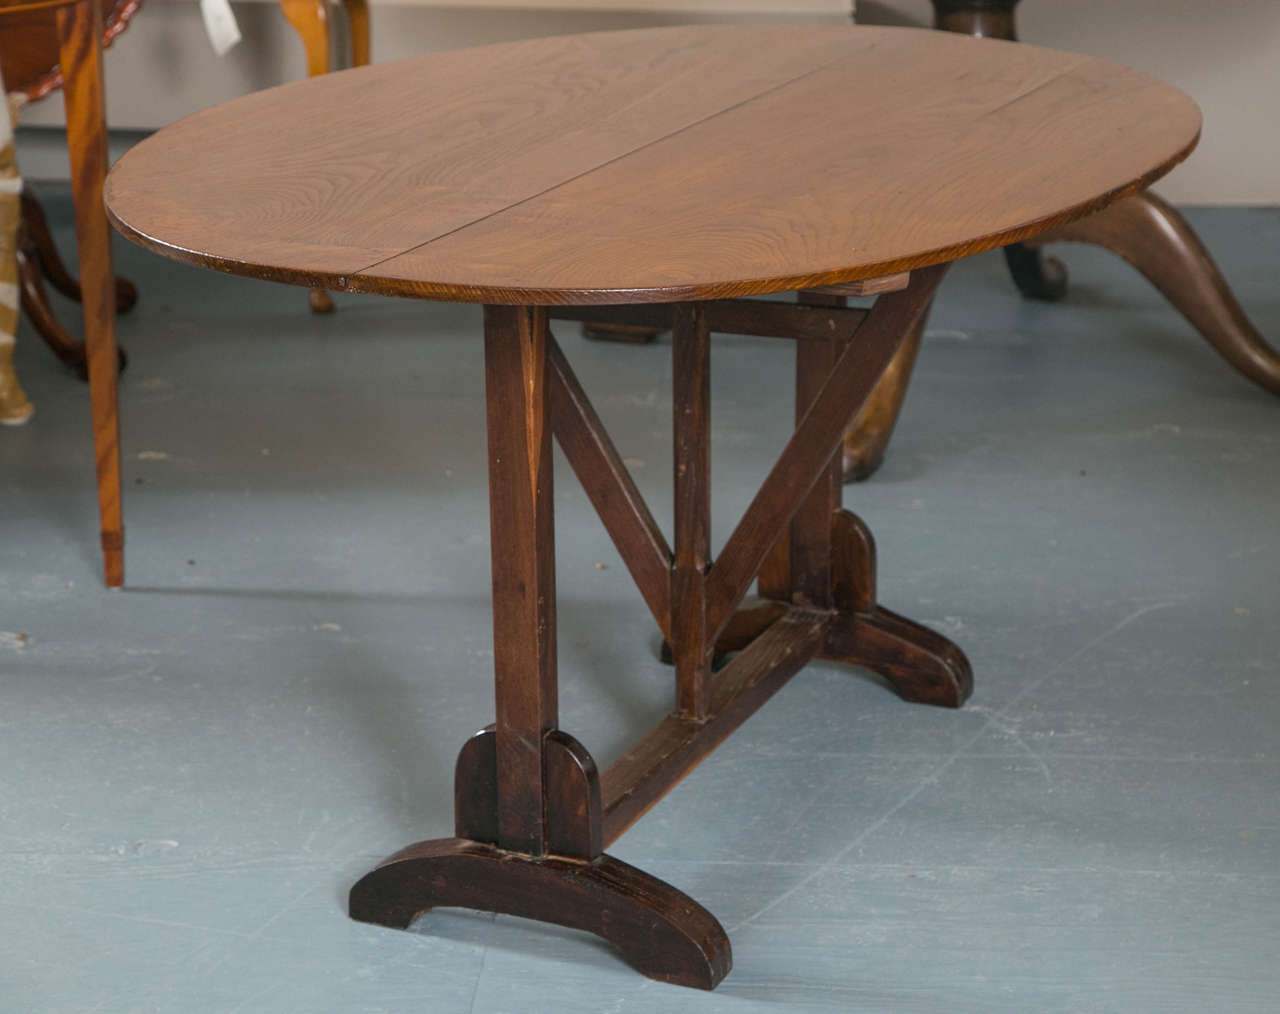 With its tilting, two board elm top and gentle elliptical shape, this table is just the right size and appearance to take outside for some libation enjoyment. Or it could be repurposed to duty in a breakfast nook. The possibilities are not endless,